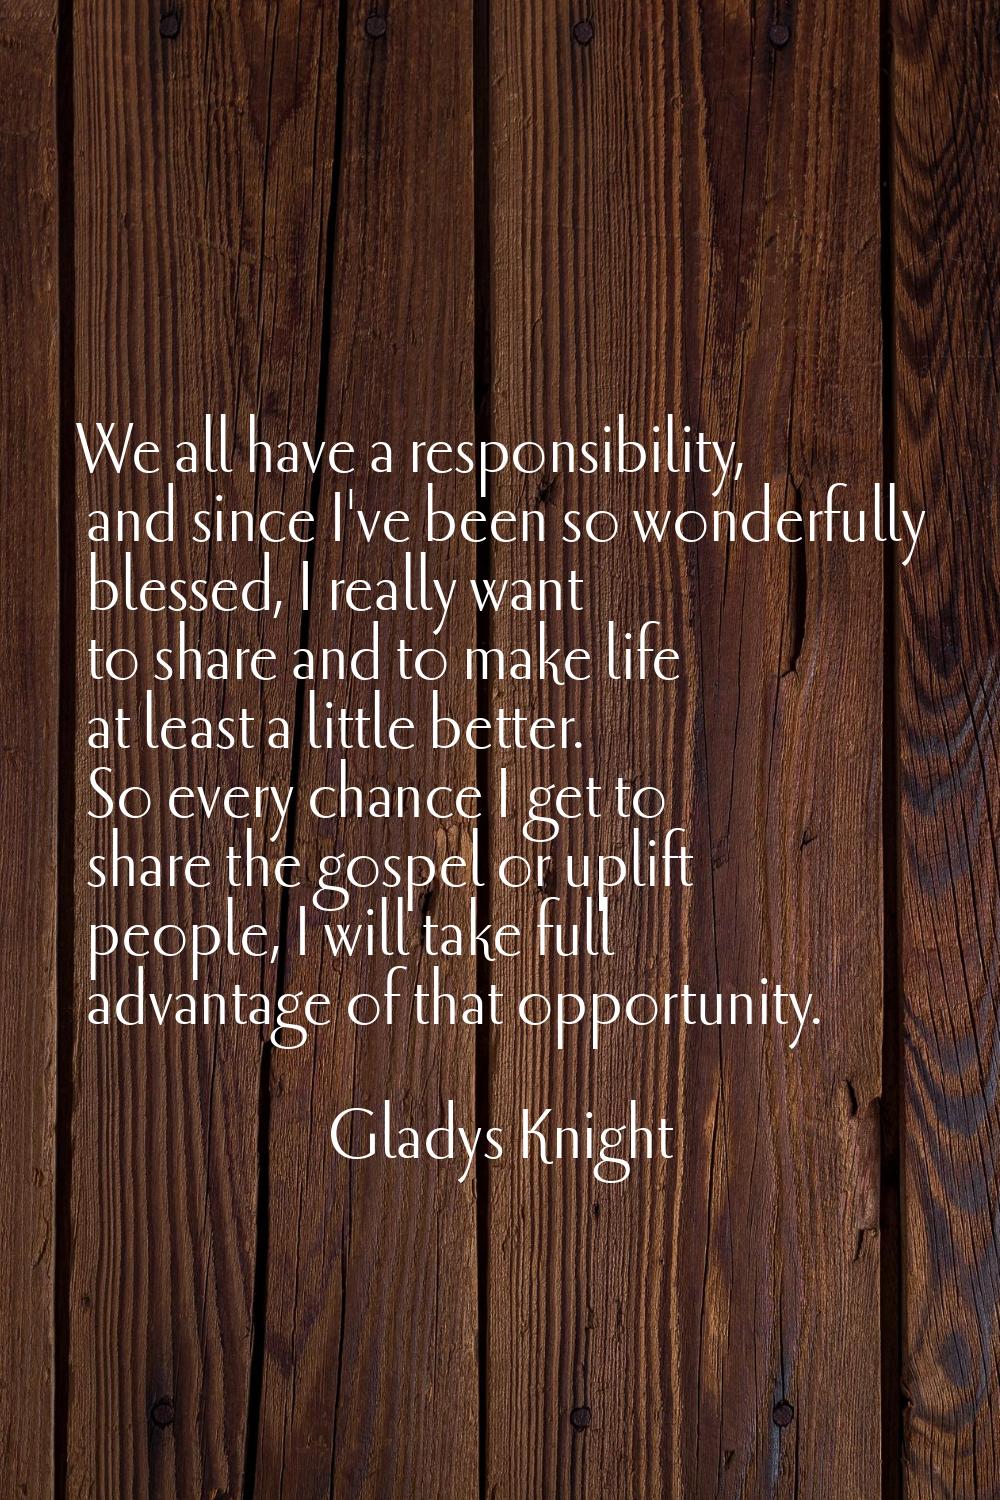 We all have a responsibility, and since I've been so wonderfully blessed, I really want to share an